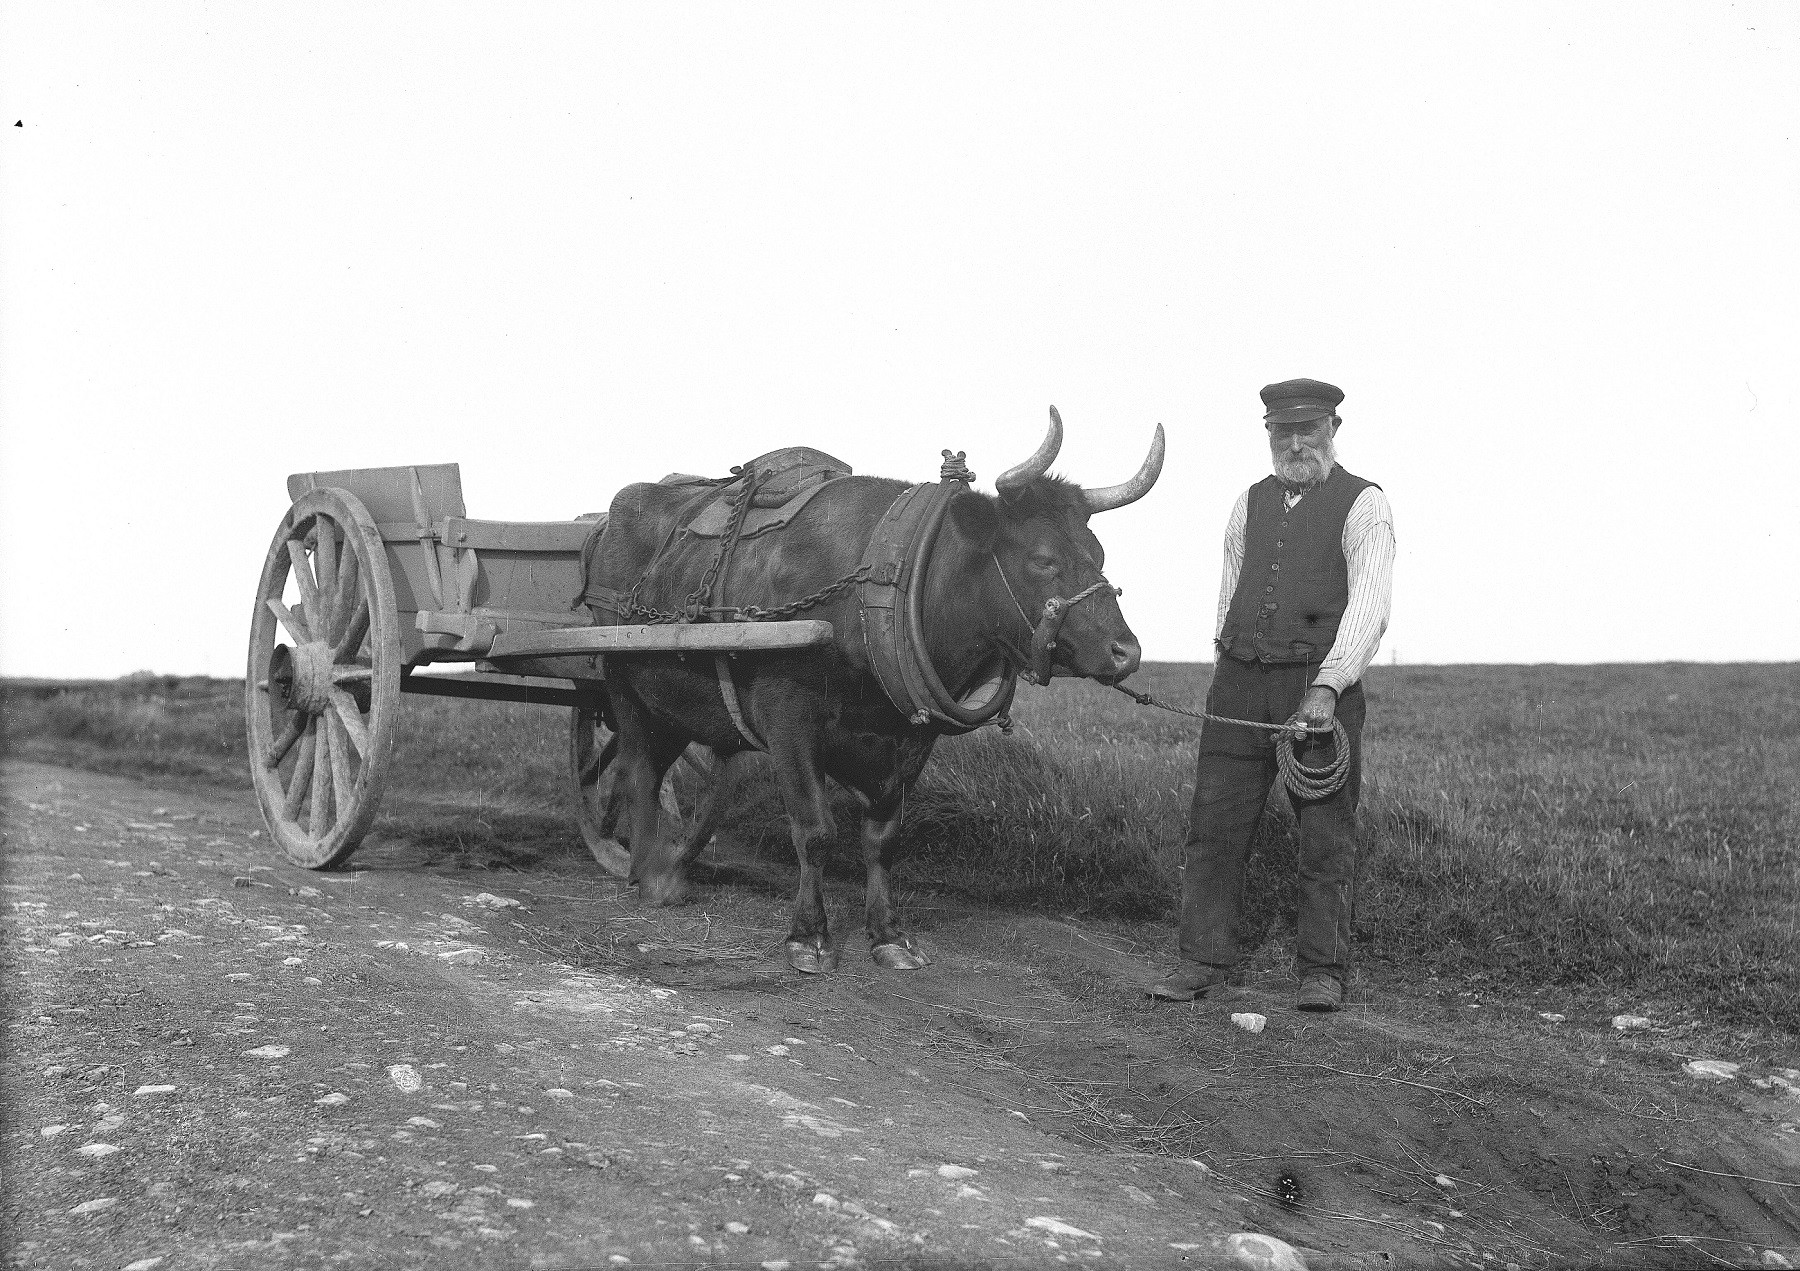 George Stout with his ox-cart, Lower Stoneybake, Fair Isle  (J D Rattar, Shetland Museum & Archives R00041)